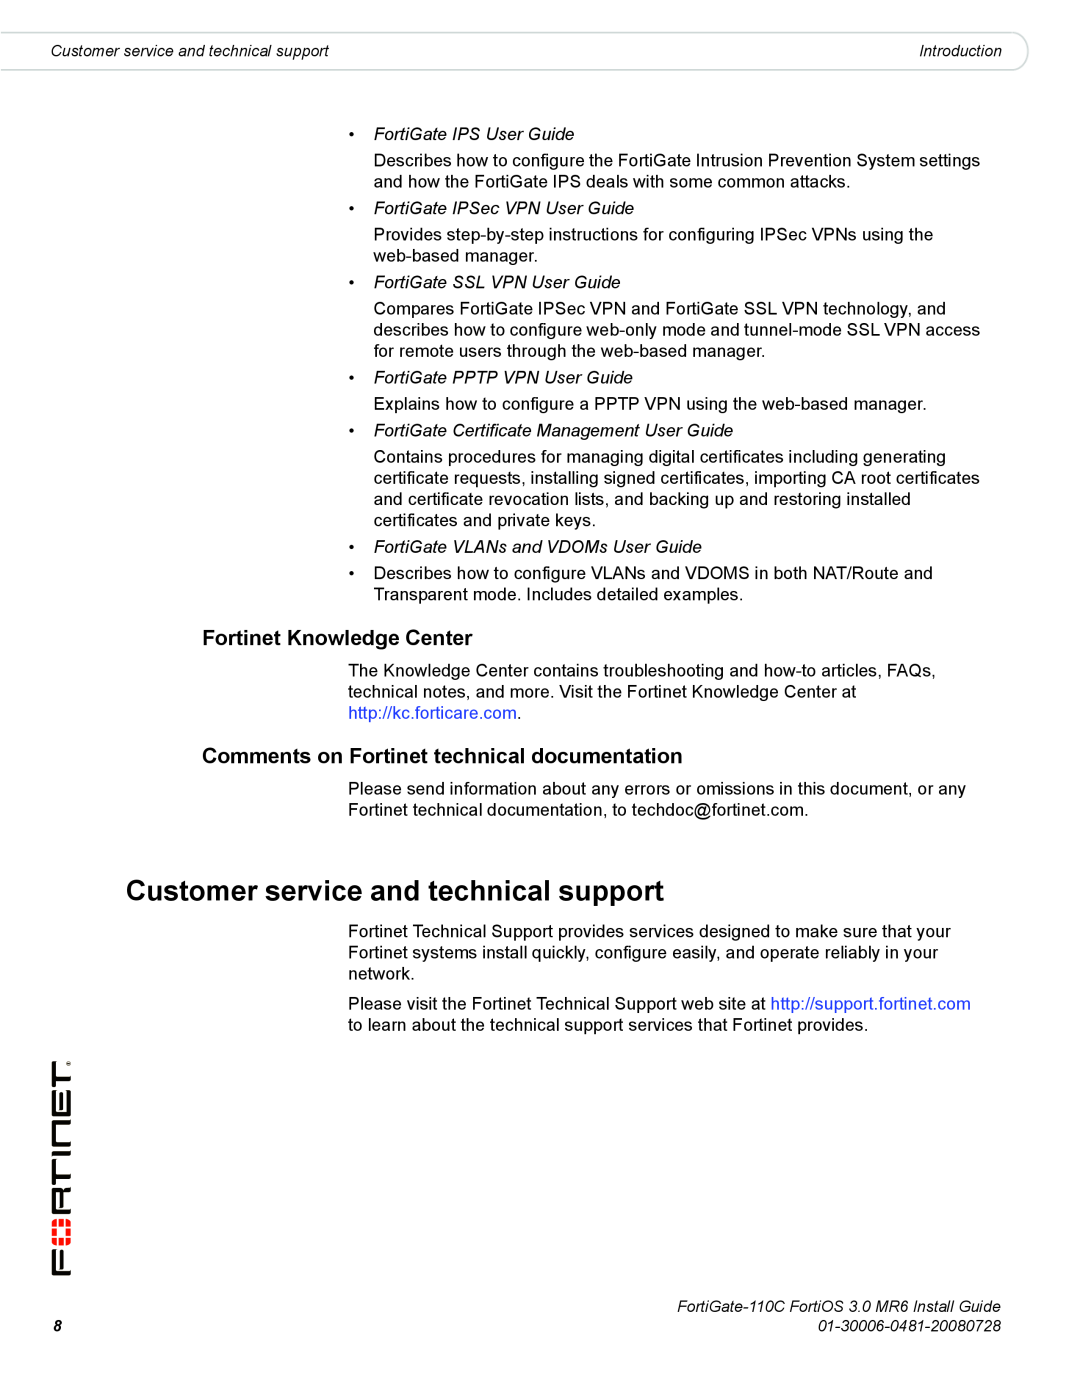 Fortinet 110C manual Customer service and technical support, Fortinet Knowledge Center, FortiGate IPS User Guide 